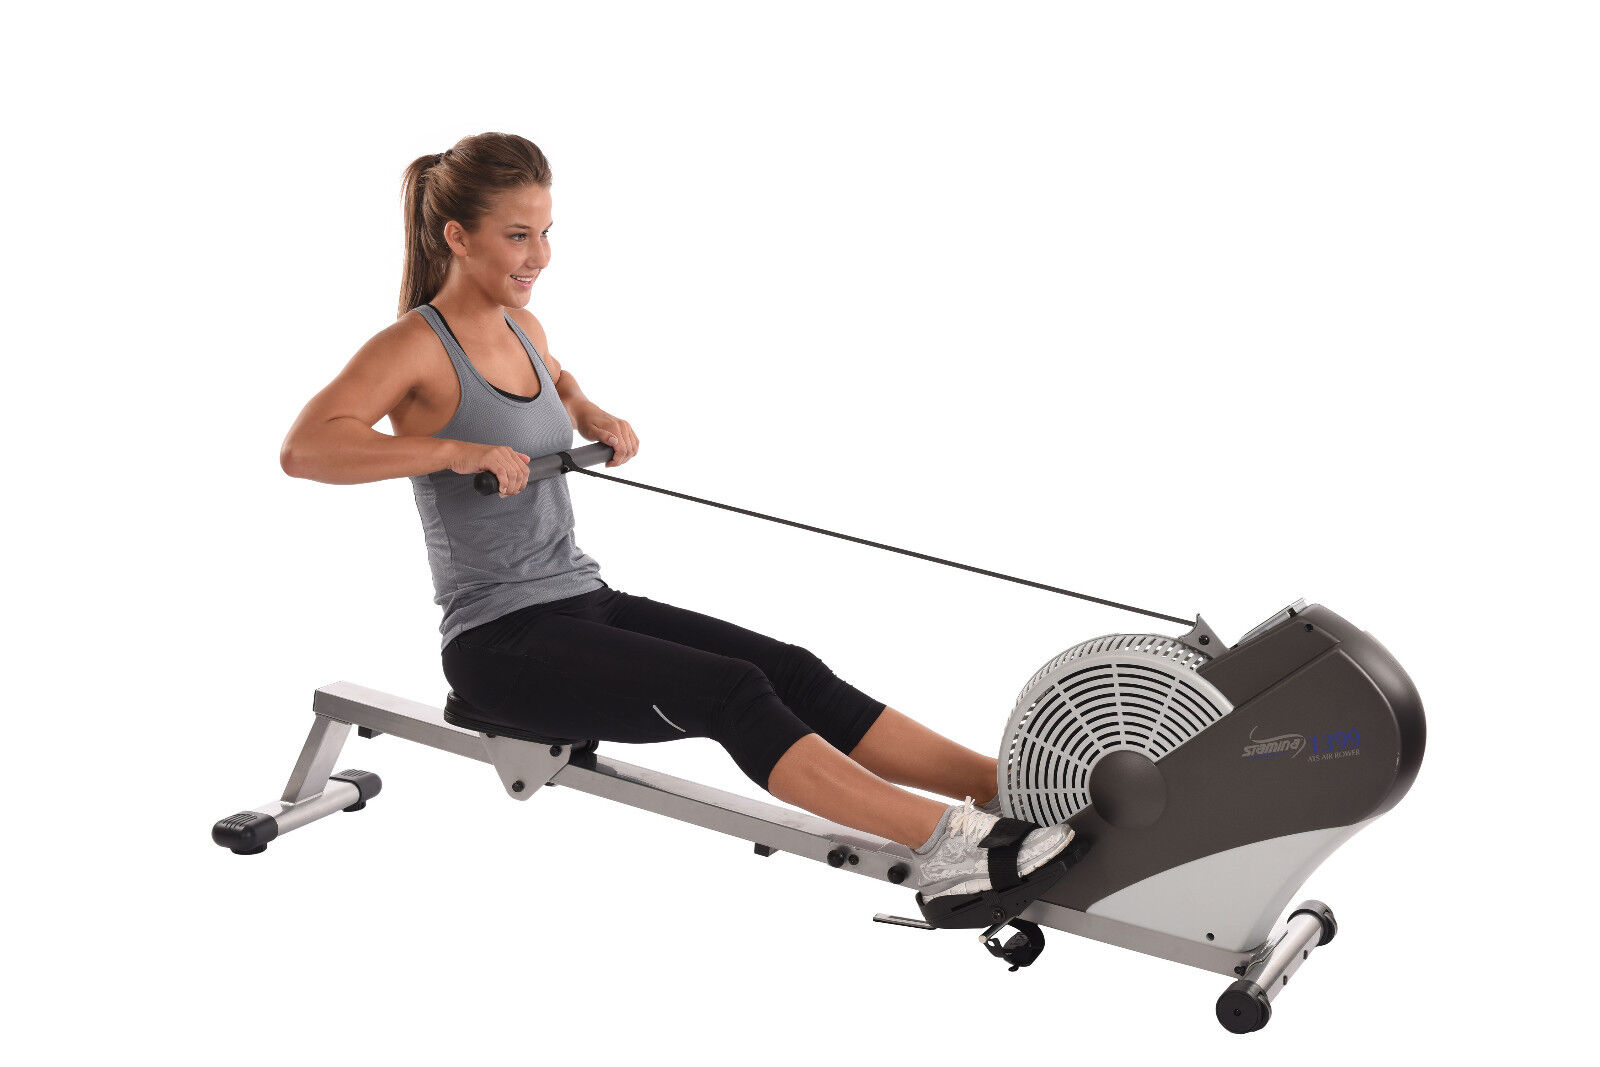 Get Your Stamina X Magnetic Rower For Less Than $225